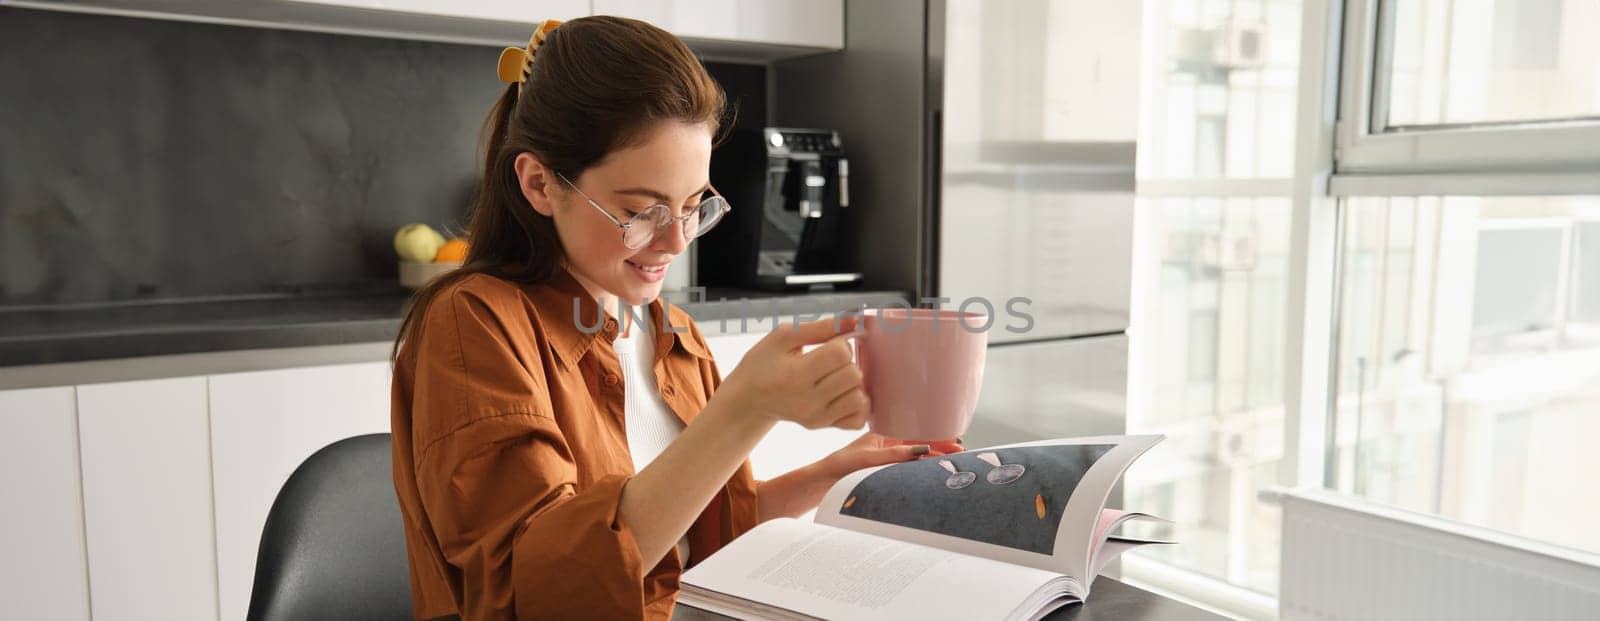 Portrait of woman reading at home, flipping pages of favourite book, relaxing in kitchen with cup of coffee, wearing glasses.